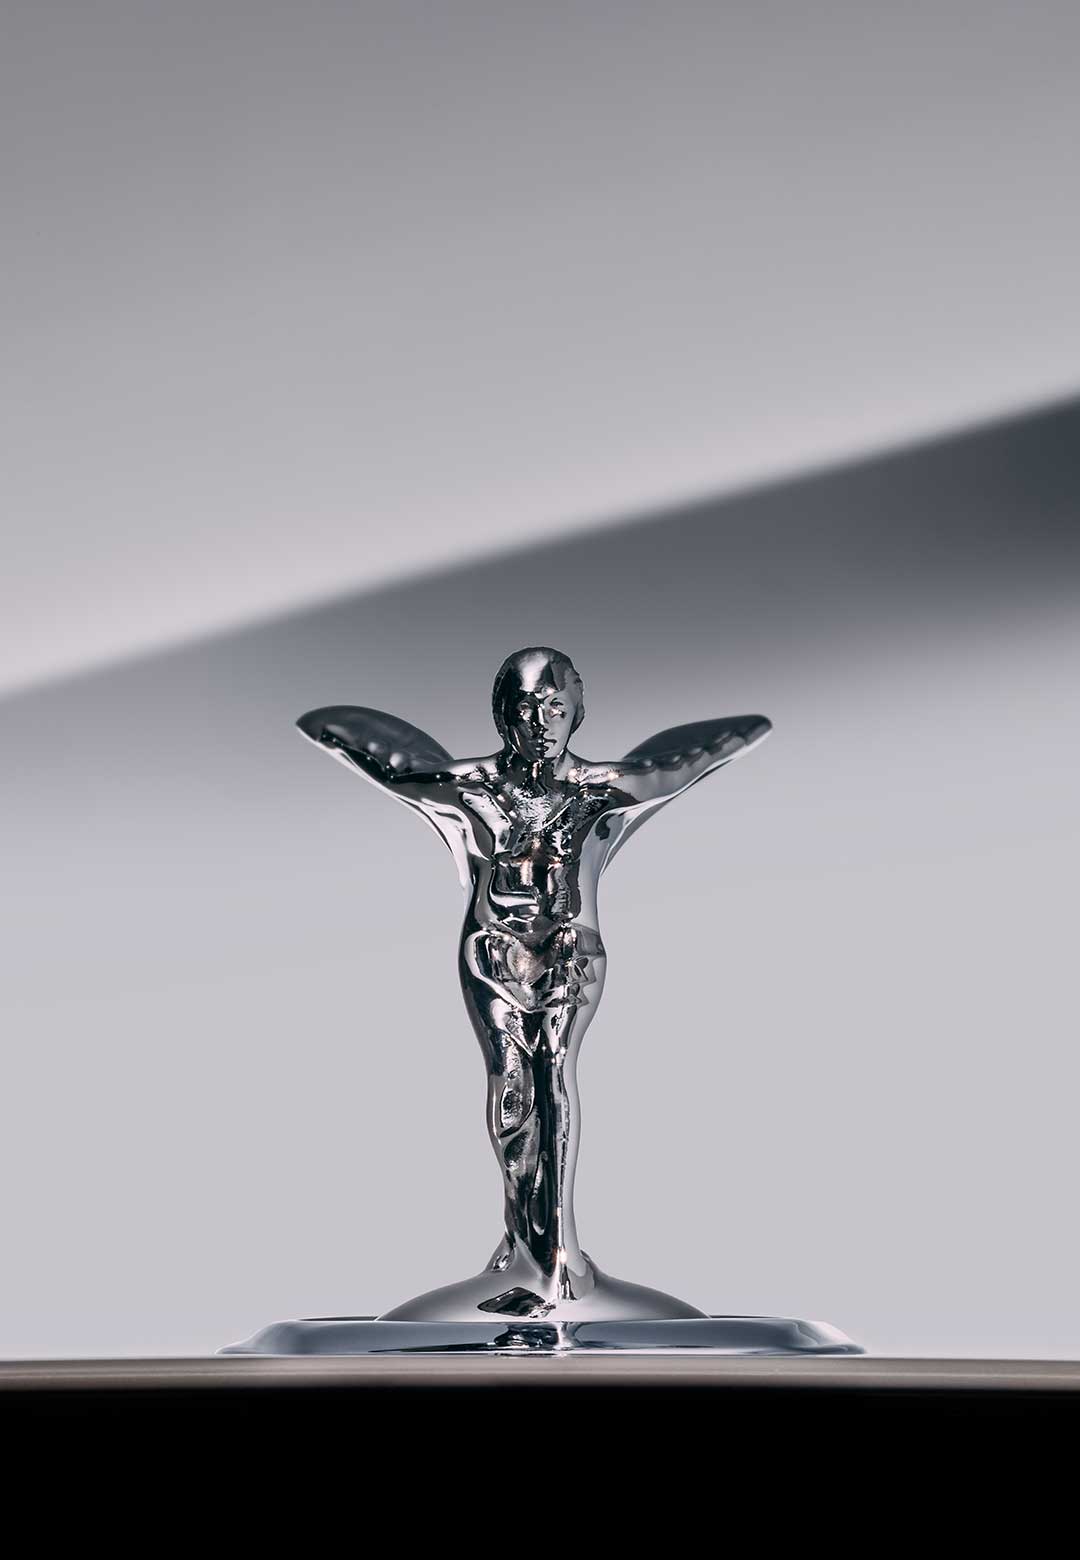 Rolls-Royce recreates the iconic Spirit of Ecstasy figurine for an all-electric future